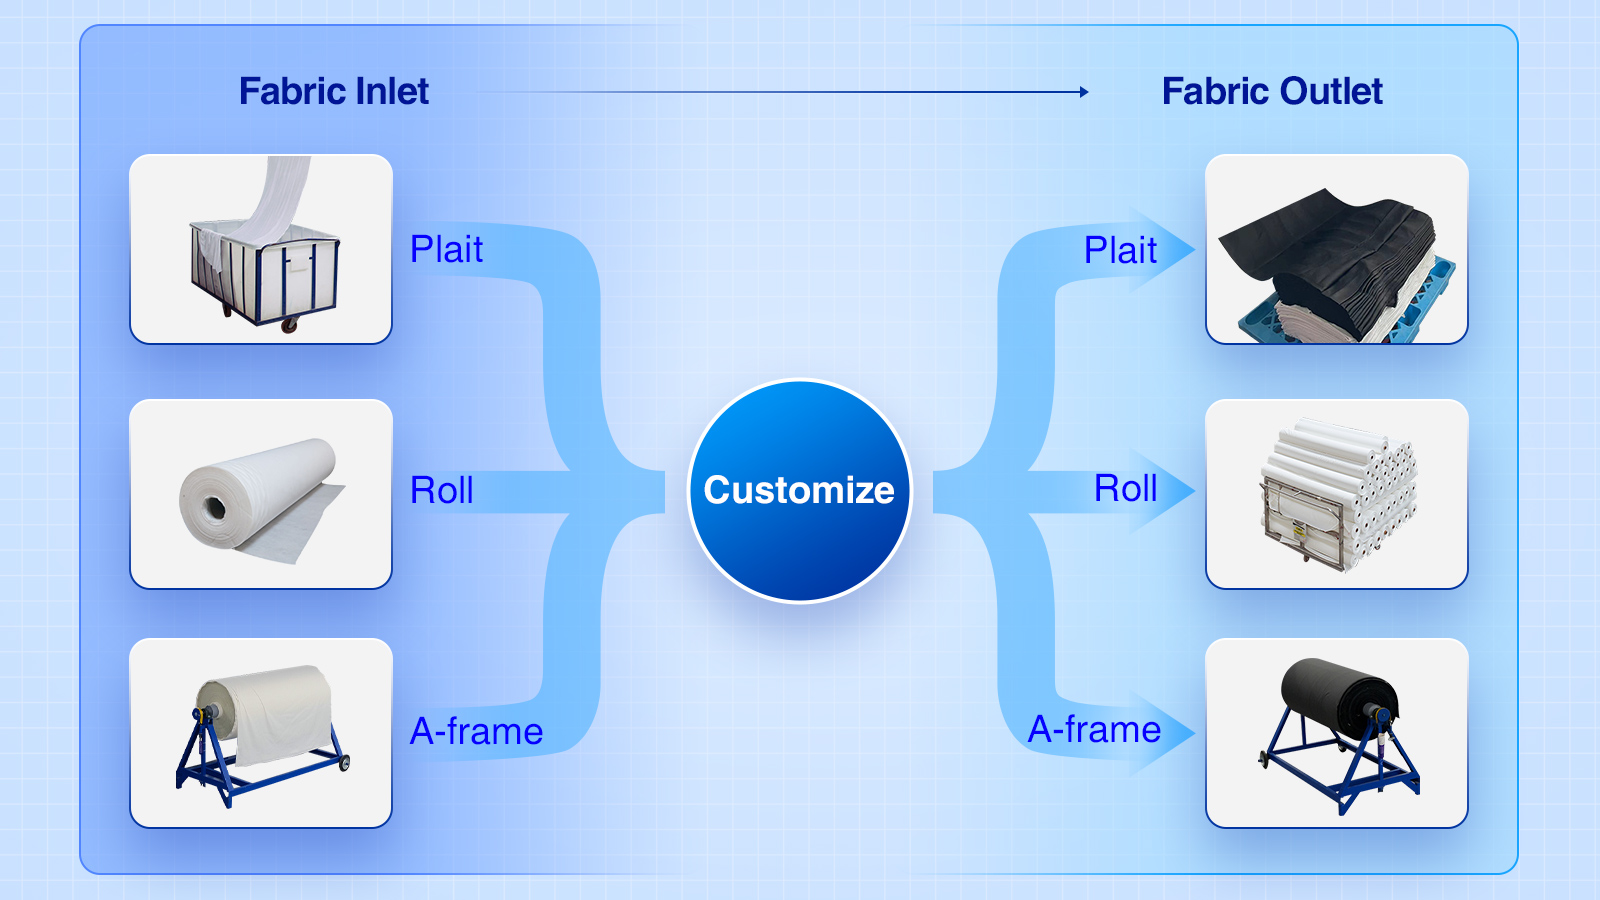 You Can Customize Fabric Inlet/Outlet as Your Production Request